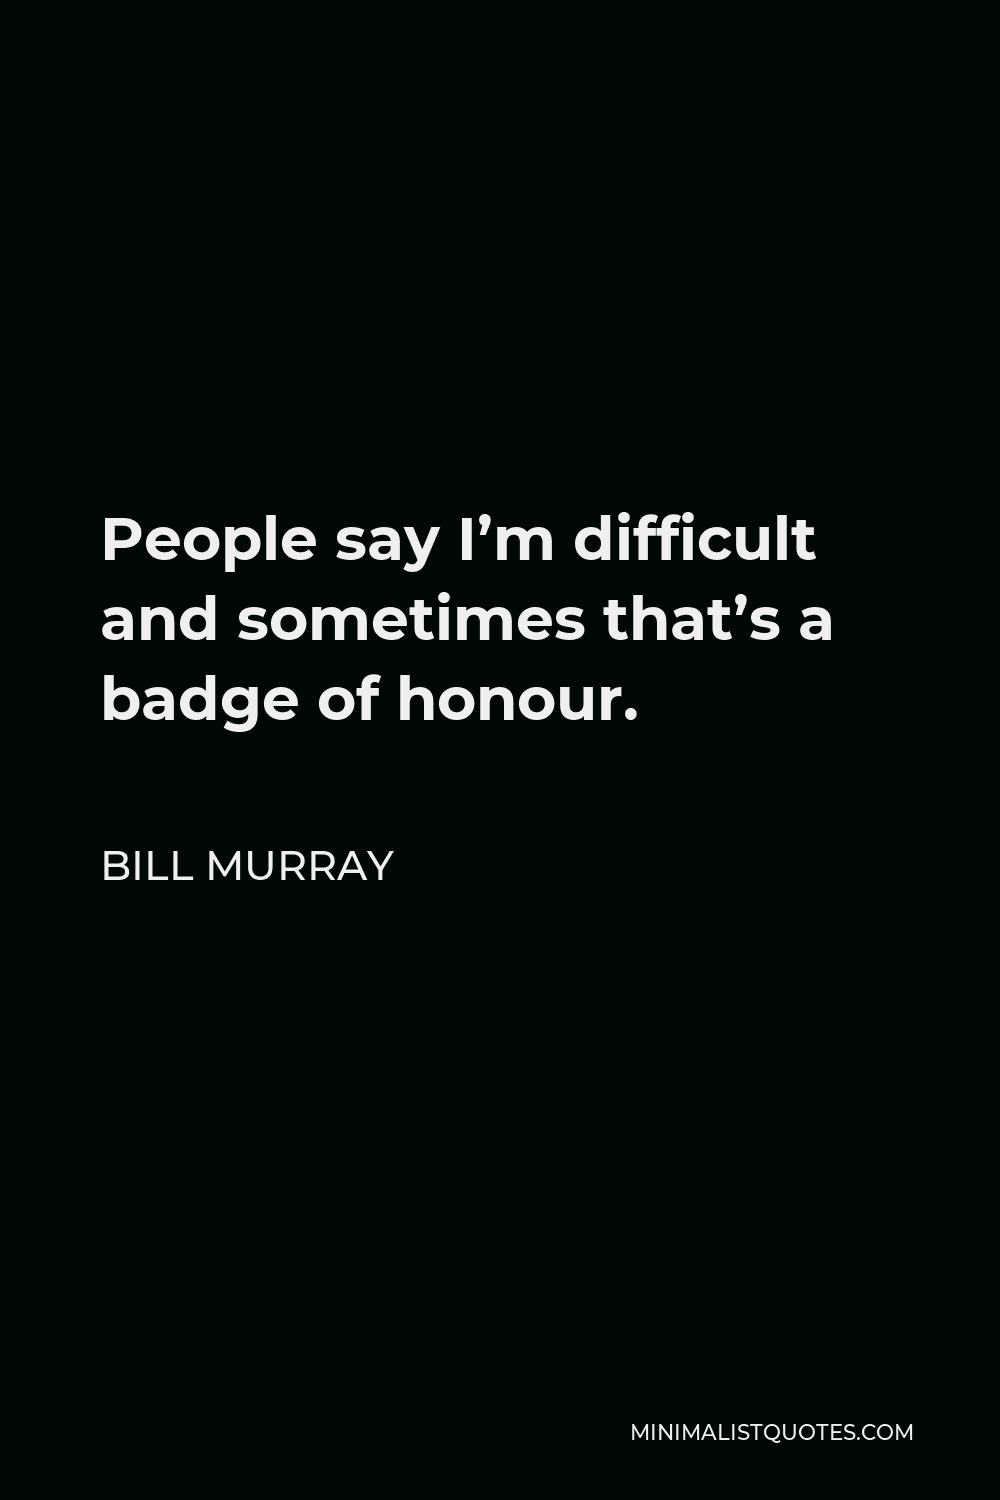 Bill Murray Quote - People say I’m difficult and sometimes that’s a badge of honour.